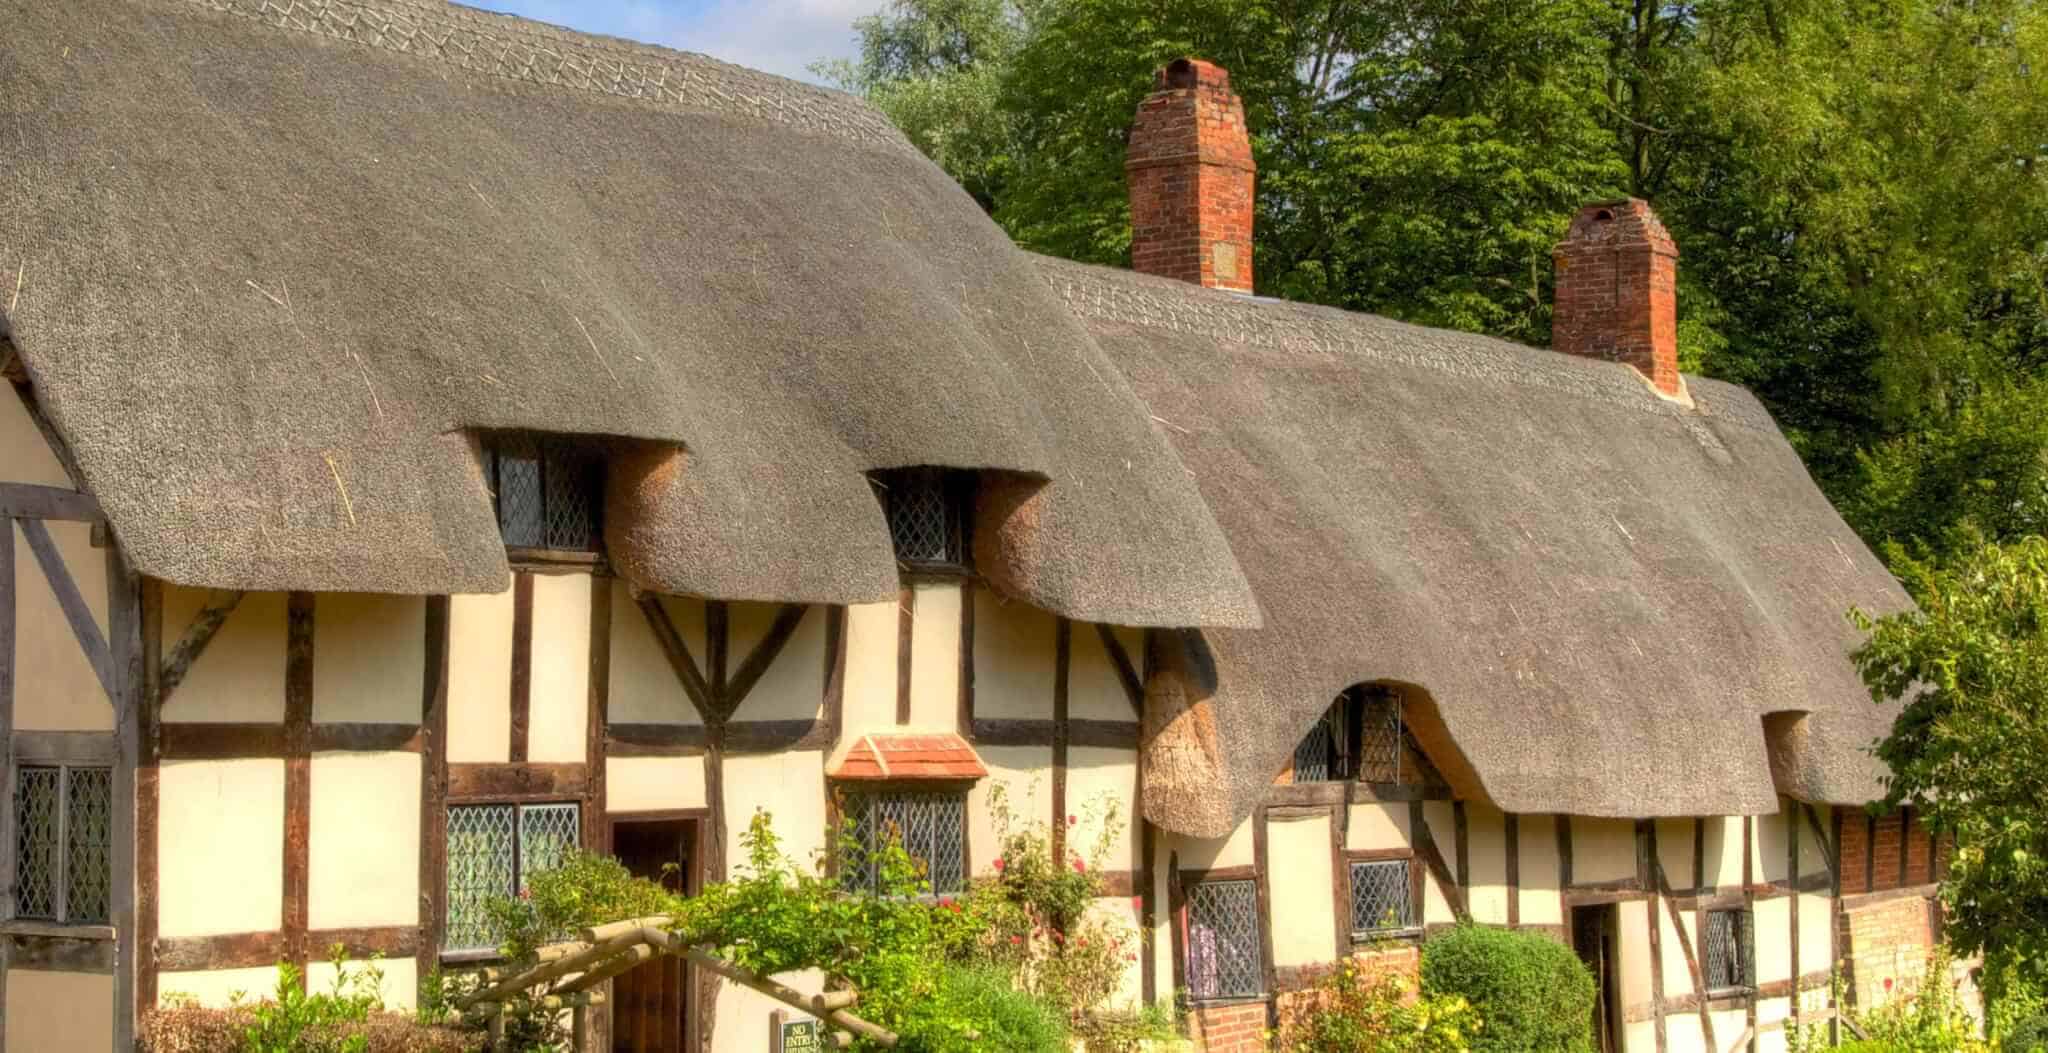 Medieval Thatched Roof Cottage